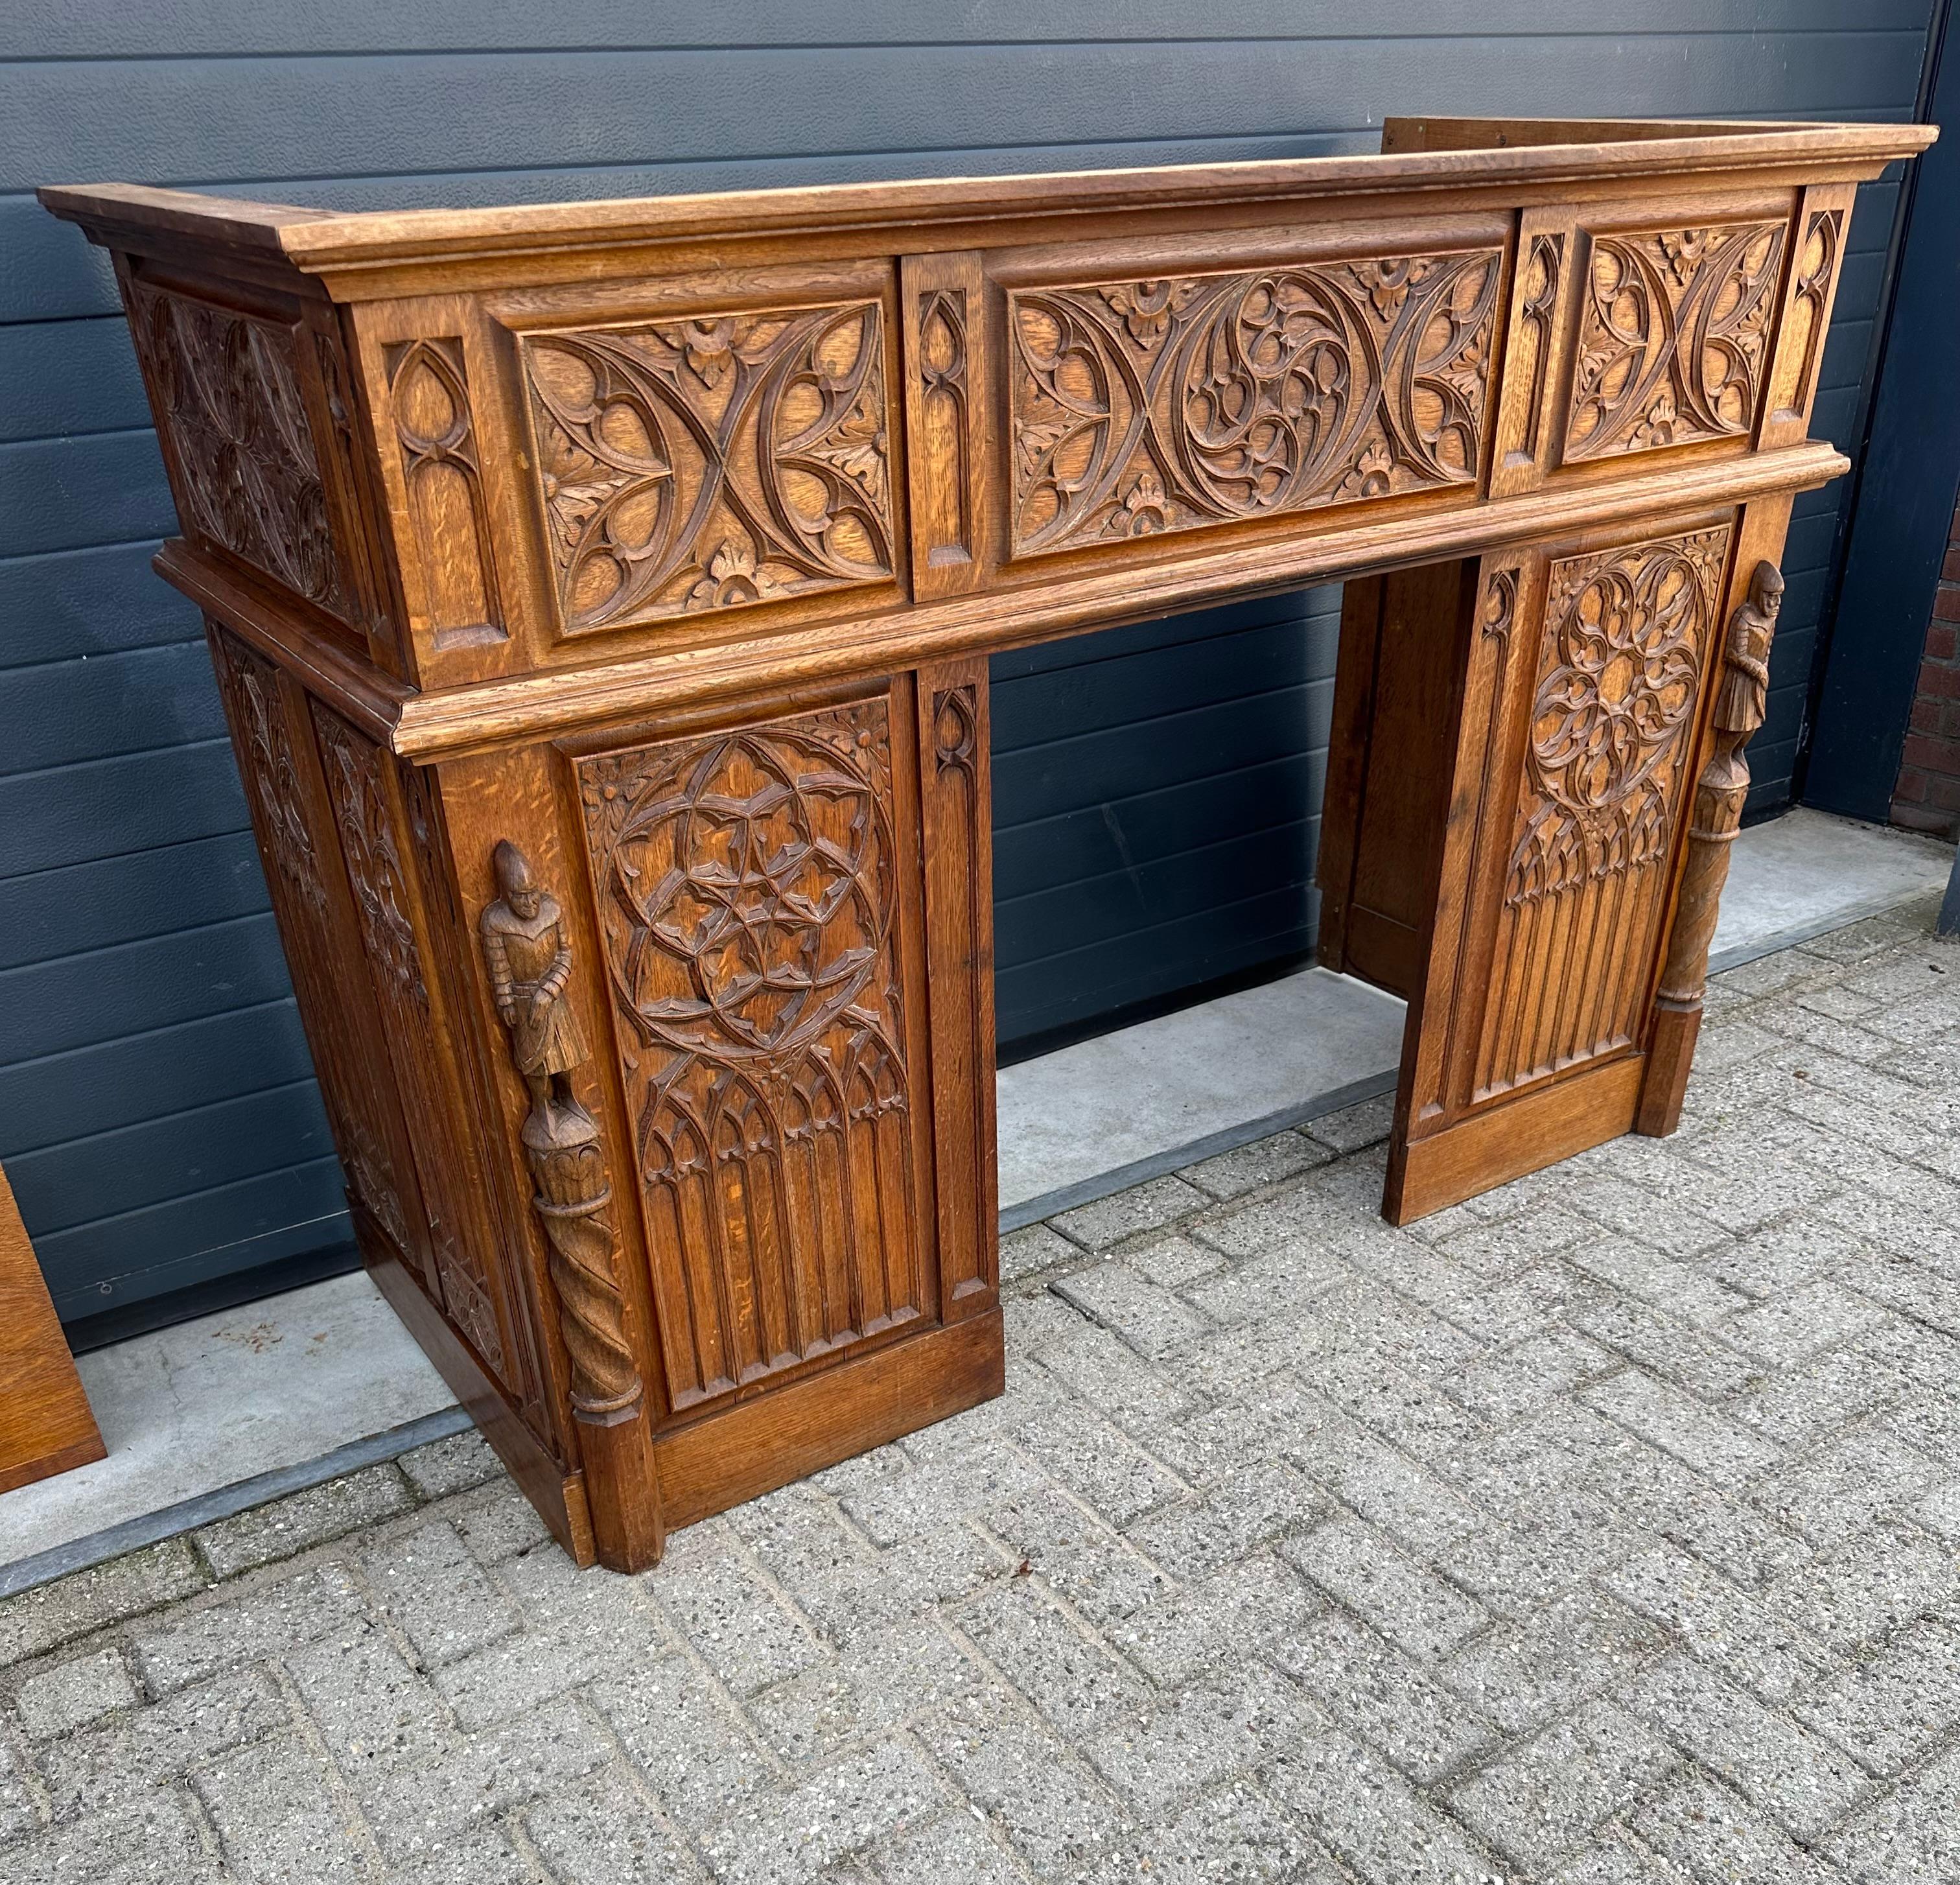 European Gothic Revival Oak Fireplace Mantel with Carved Church Window Panels & Guards For Sale